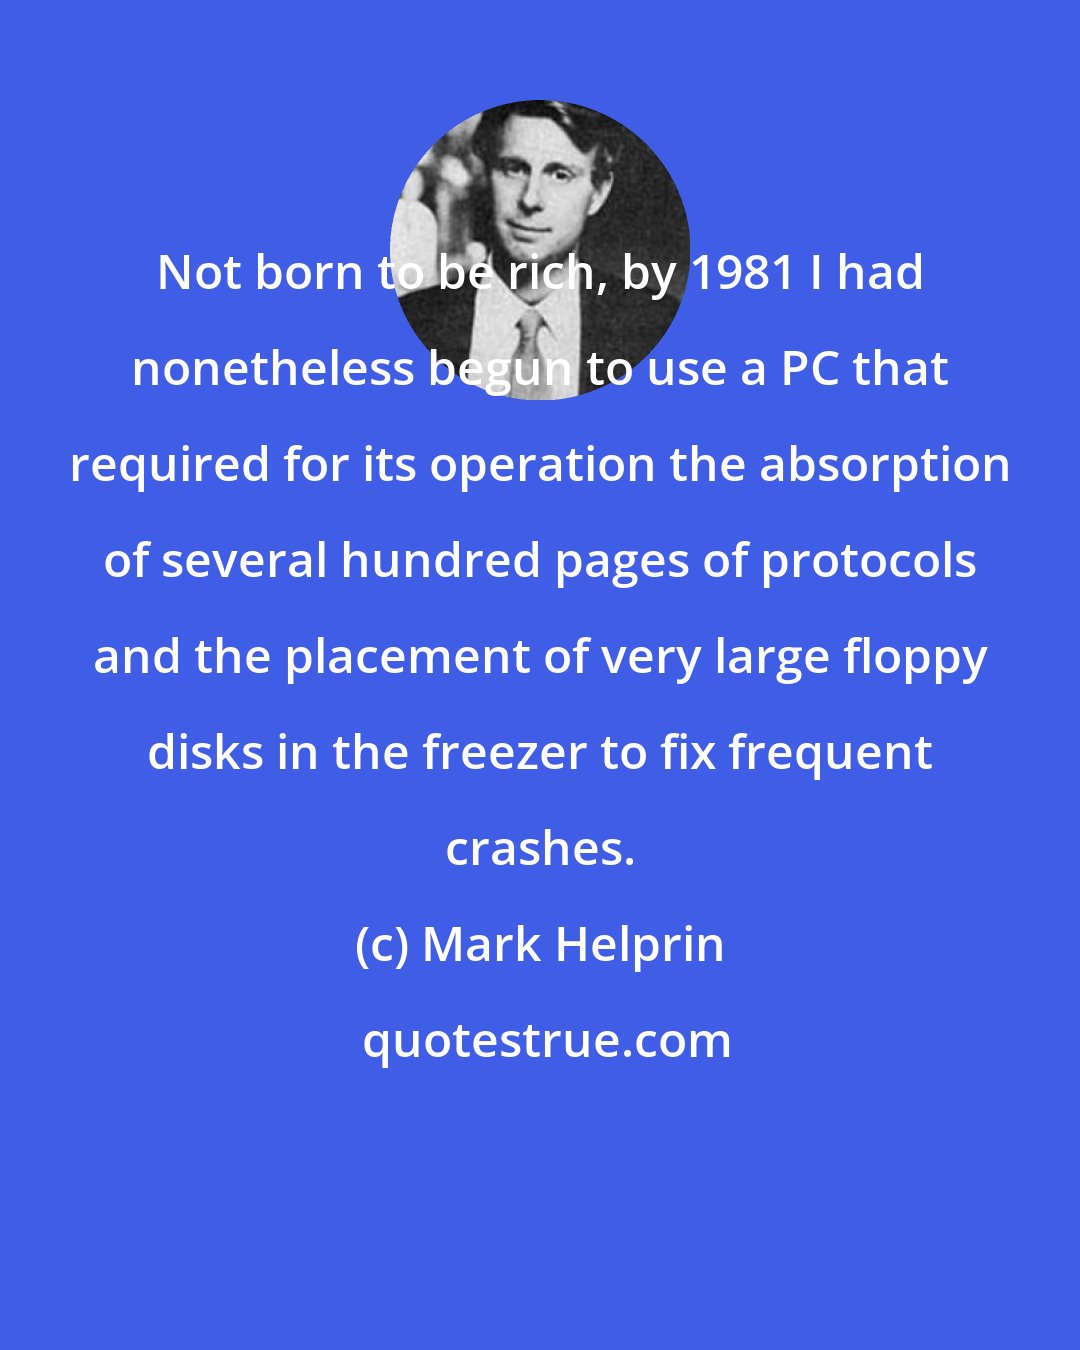 Mark Helprin: Not born to be rich, by 1981 I had nonetheless begun to use a PC that required for its operation the absorption of several hundred pages of protocols and the placement of very large floppy disks in the freezer to fix frequent crashes.